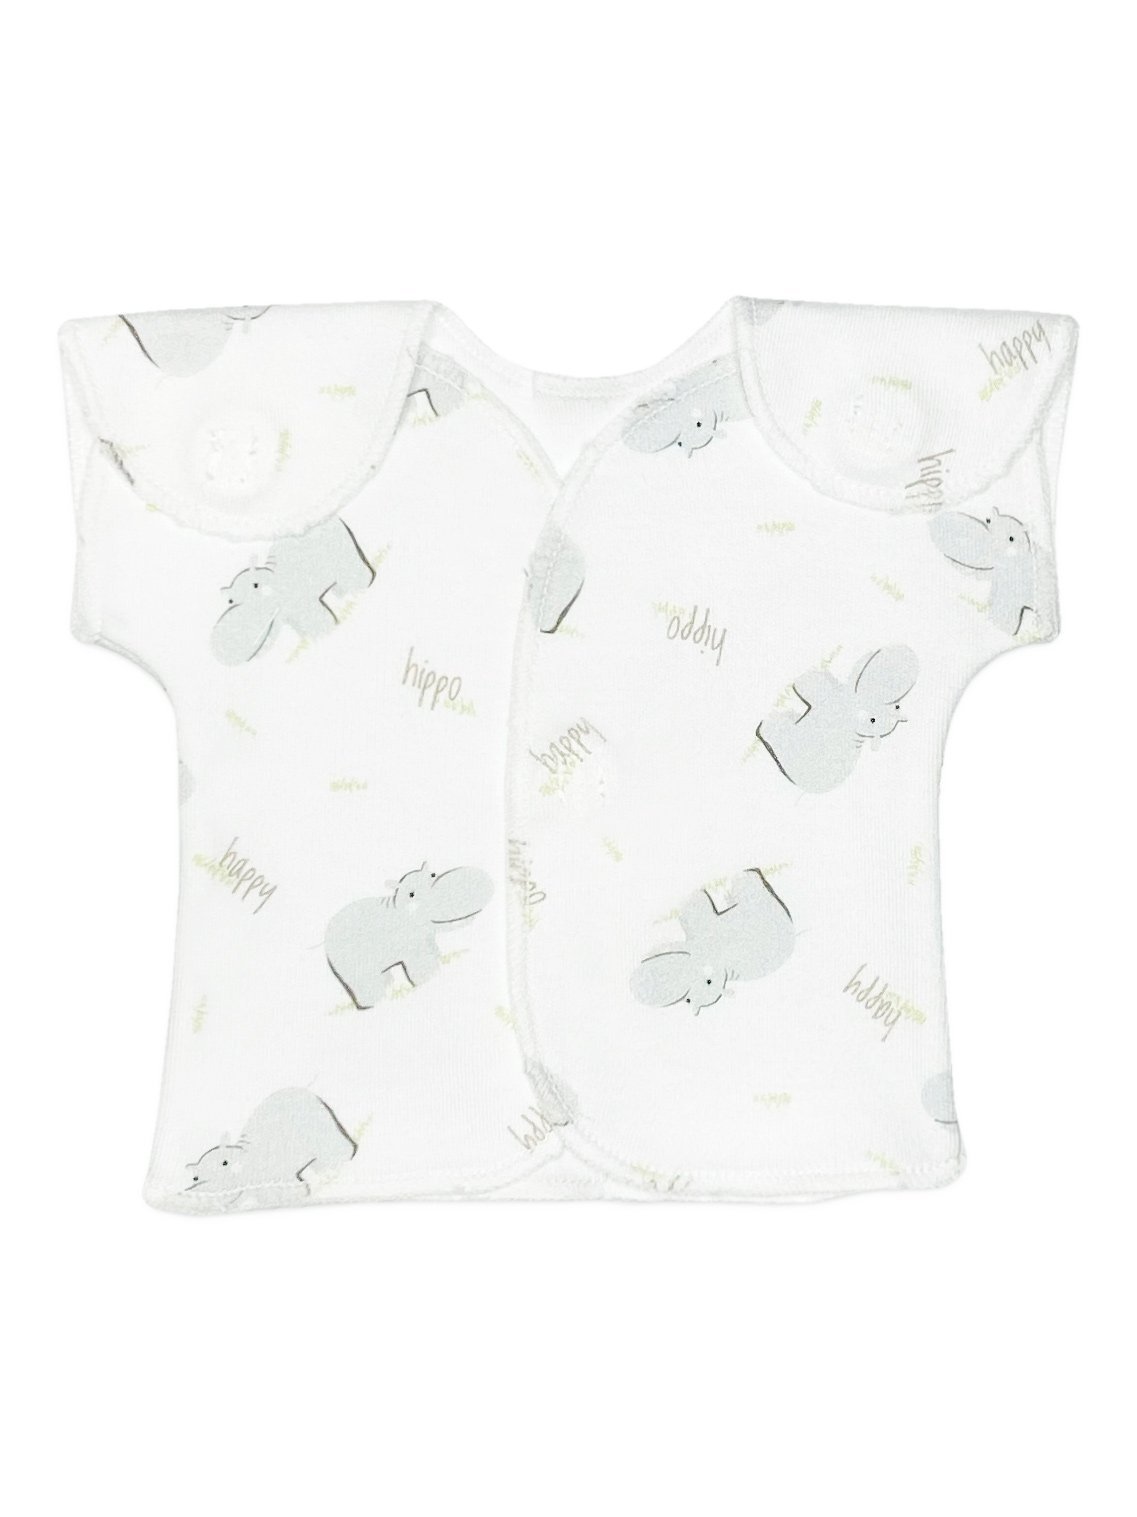 Wrap-over premature baby top, hippos - Incubator Vest - Itty Bitty Baby Clothing